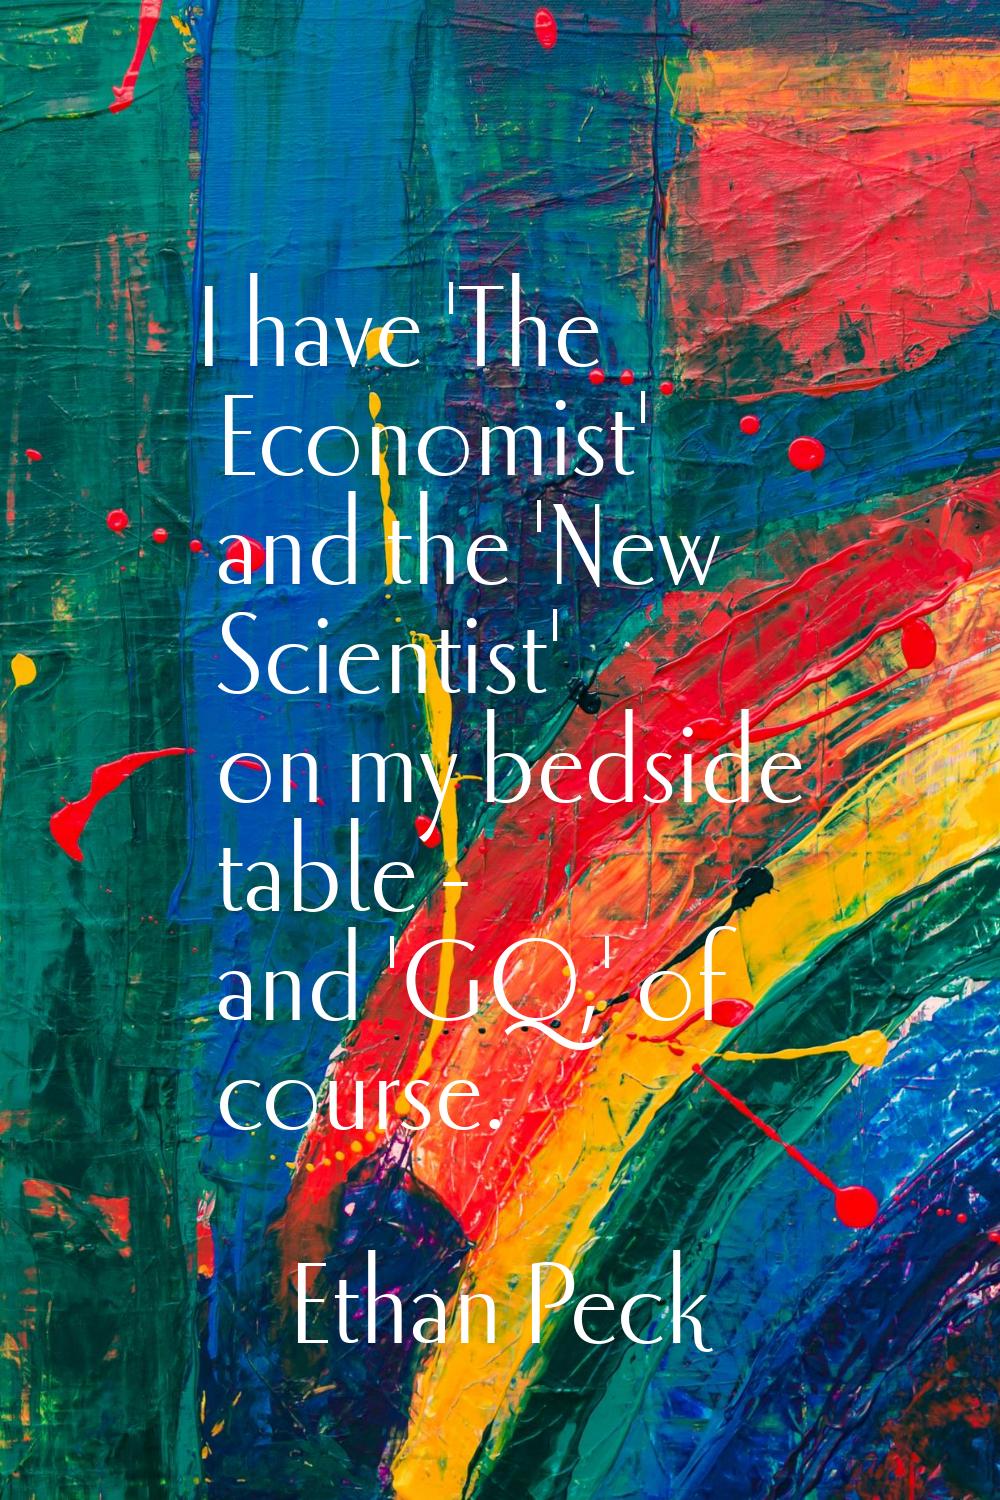 I have 'The Economist' and the 'New Scientist' on my bedside table - and 'GQ,' of course.